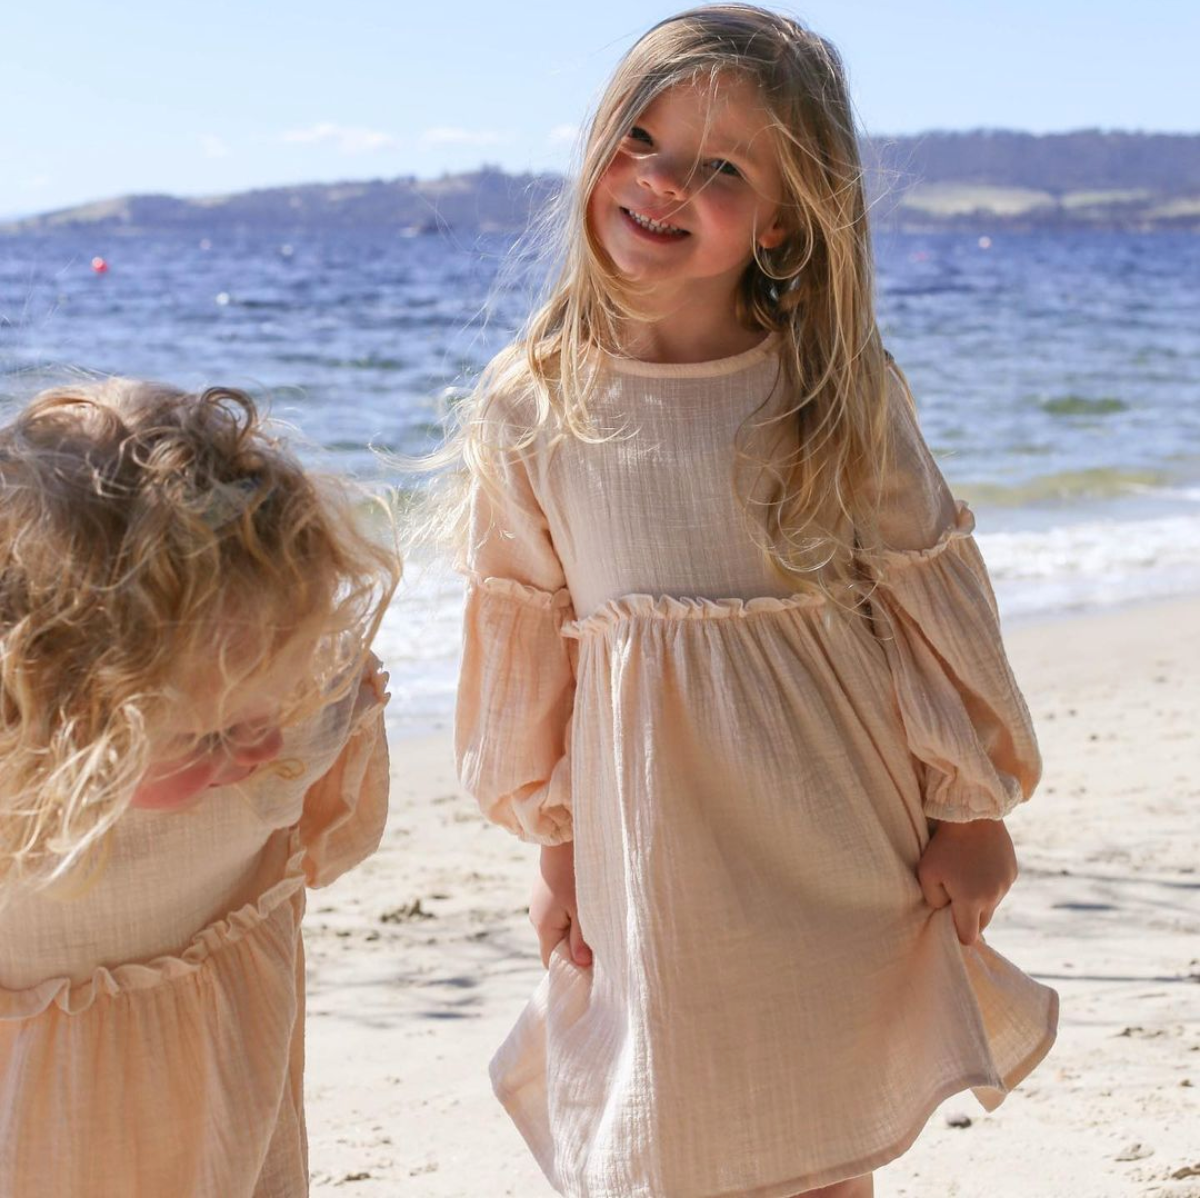 Beautifully bohemian, the Belle dress is a versatile and transeasonal addition to your little one's wardrobe. Made from an easy-care cotton and linen blend this dress is a wash and wear wardrobe staple. Loui the Label